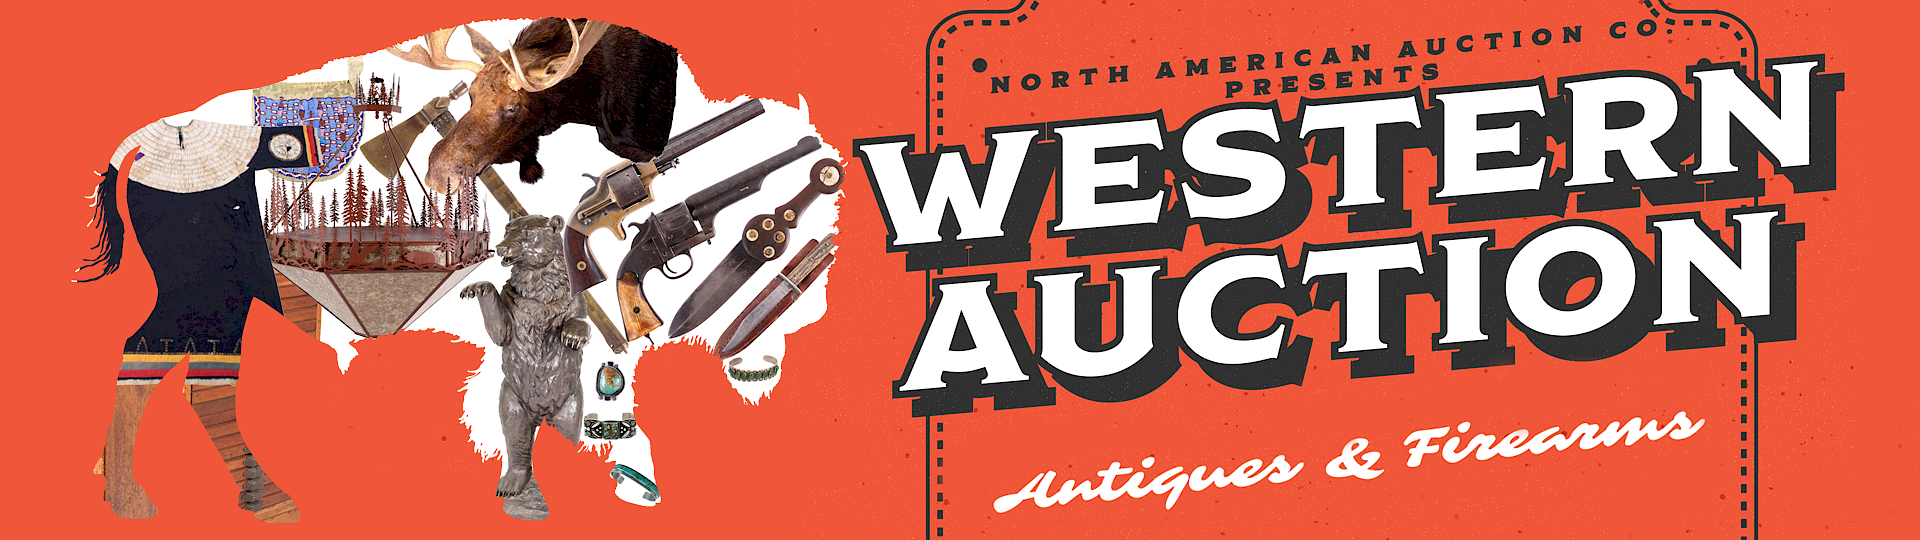 American Indian & Western Firearm Antique Sale October 27th by North American Auction Company